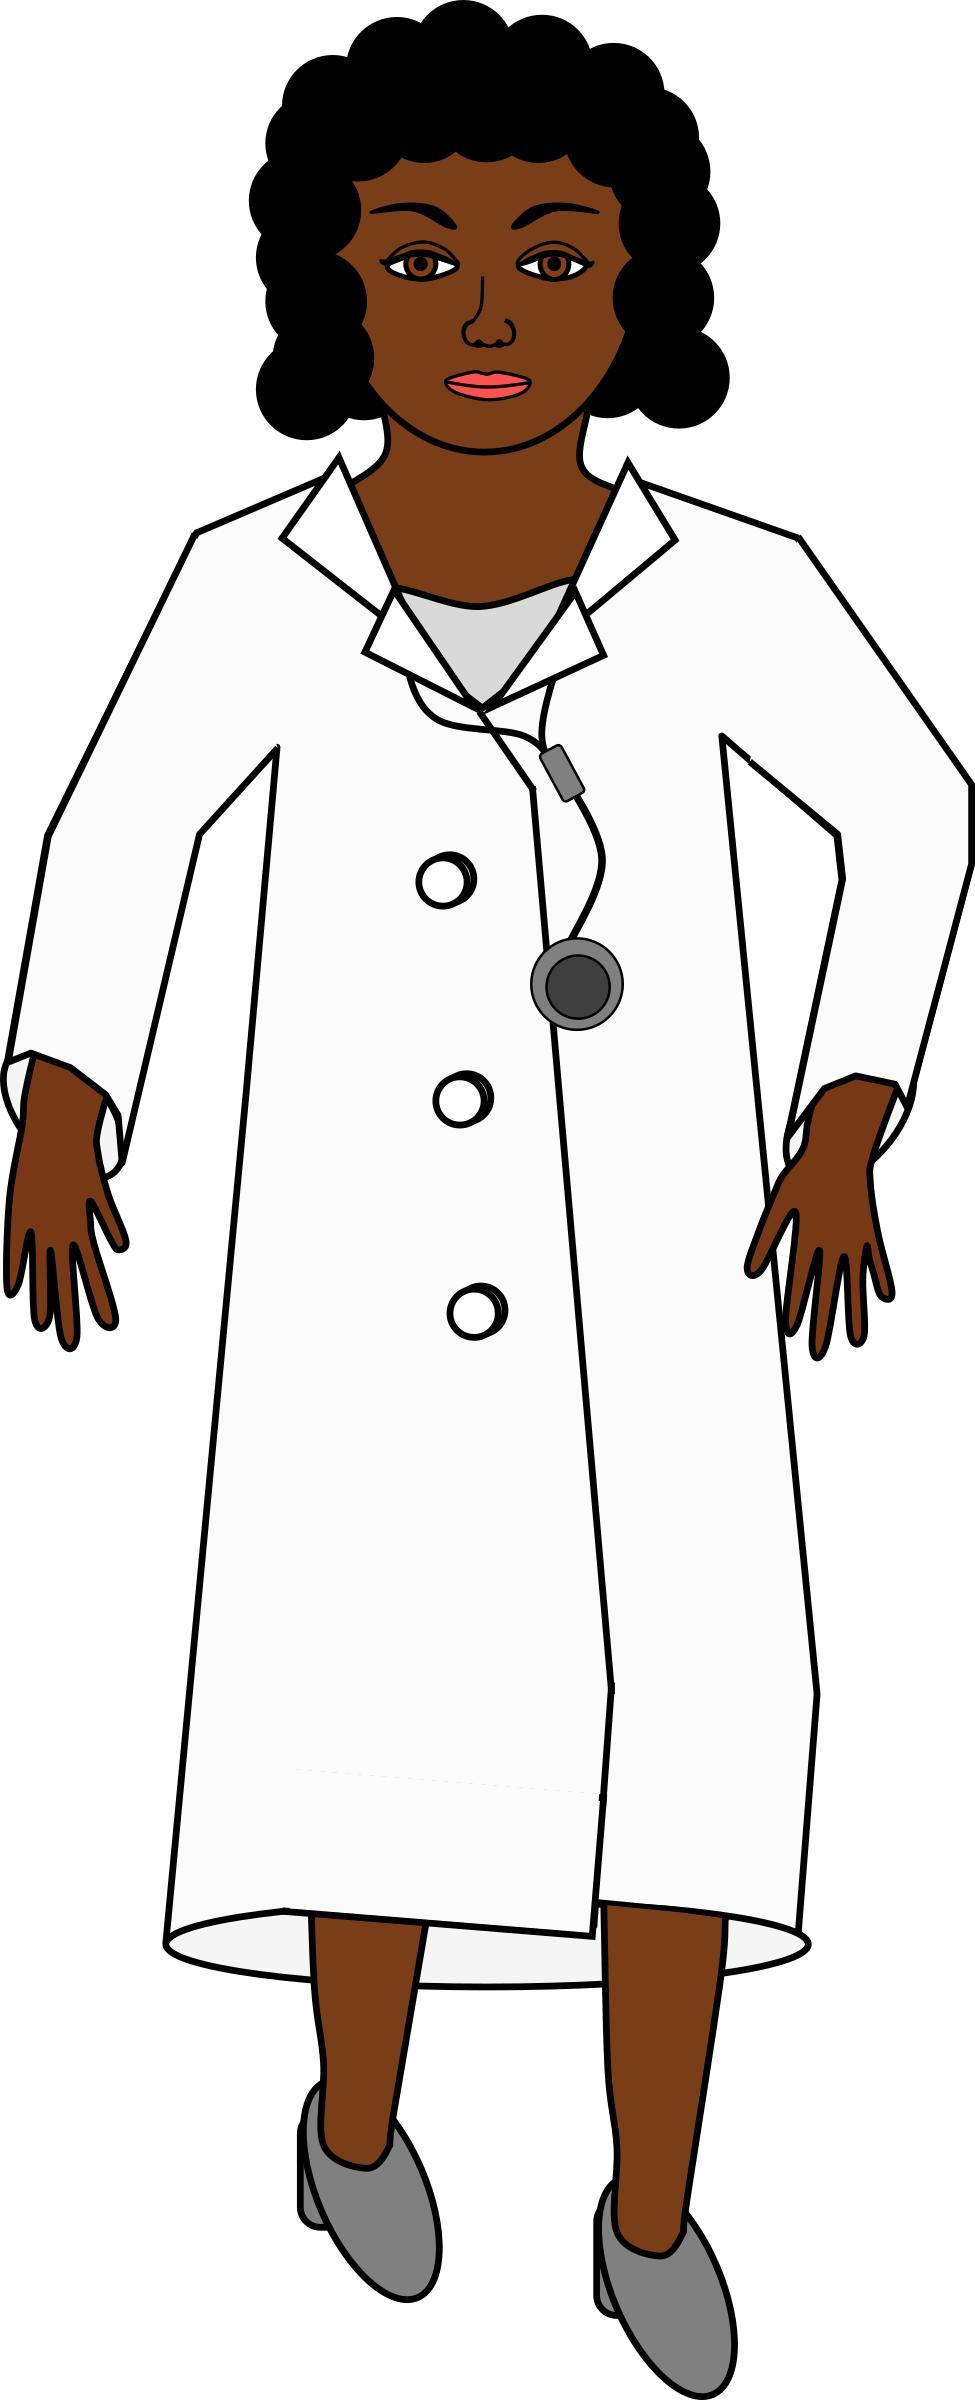 A doctor with a stethoscope png transparent